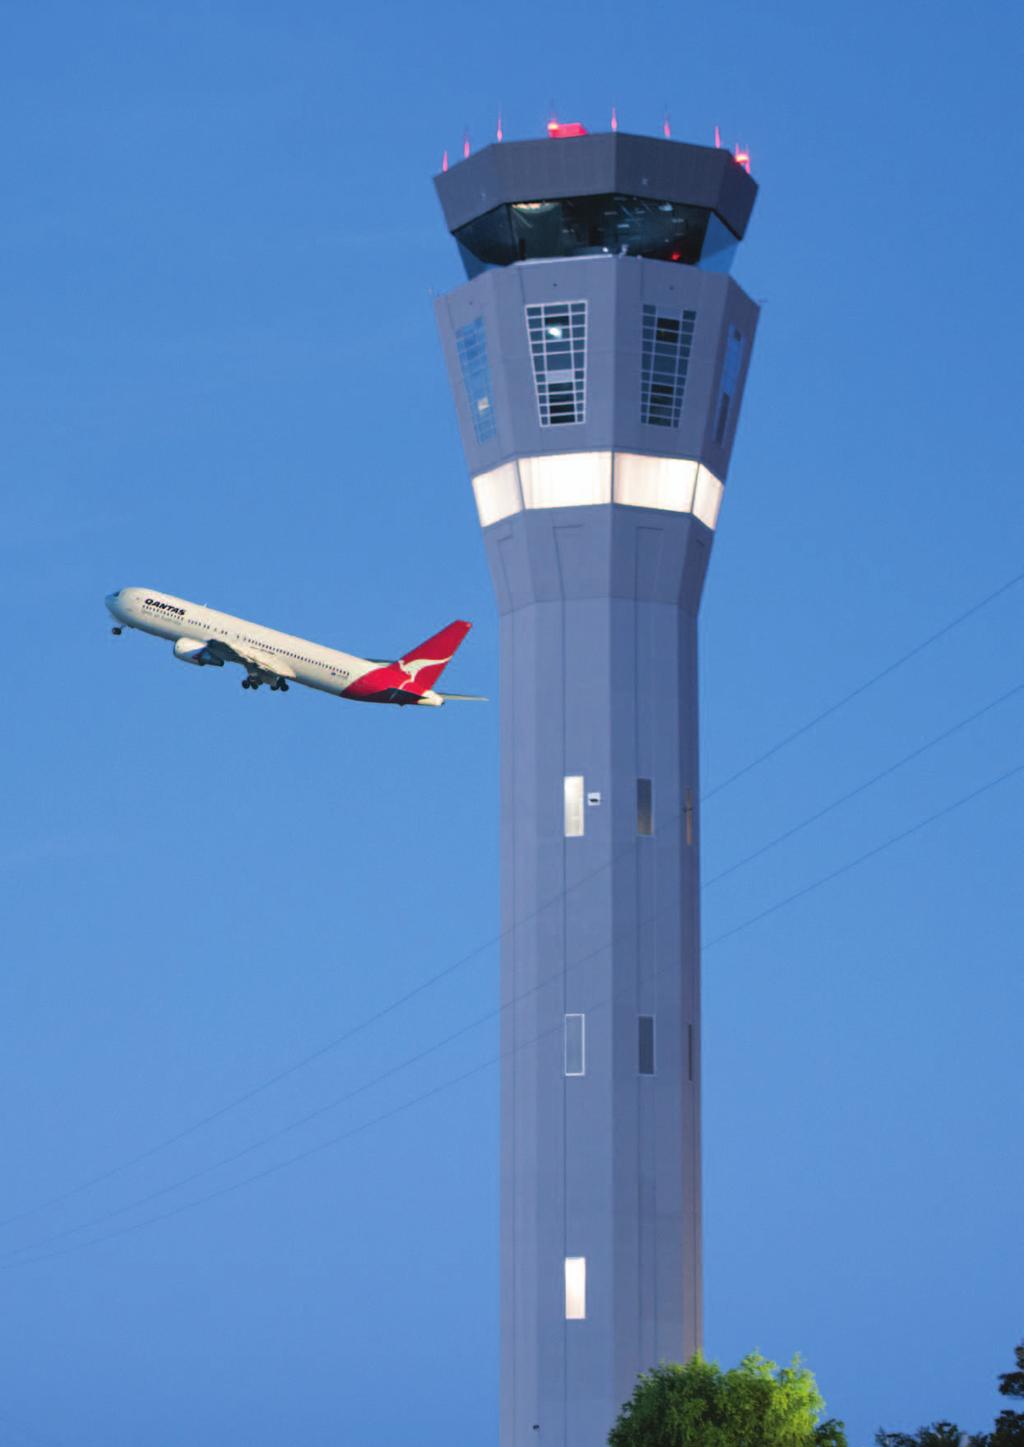 Hy-Tec s North Melbourne plant supplied in-situ concrete using a slipform method for the new Tullamarine Airport tower.